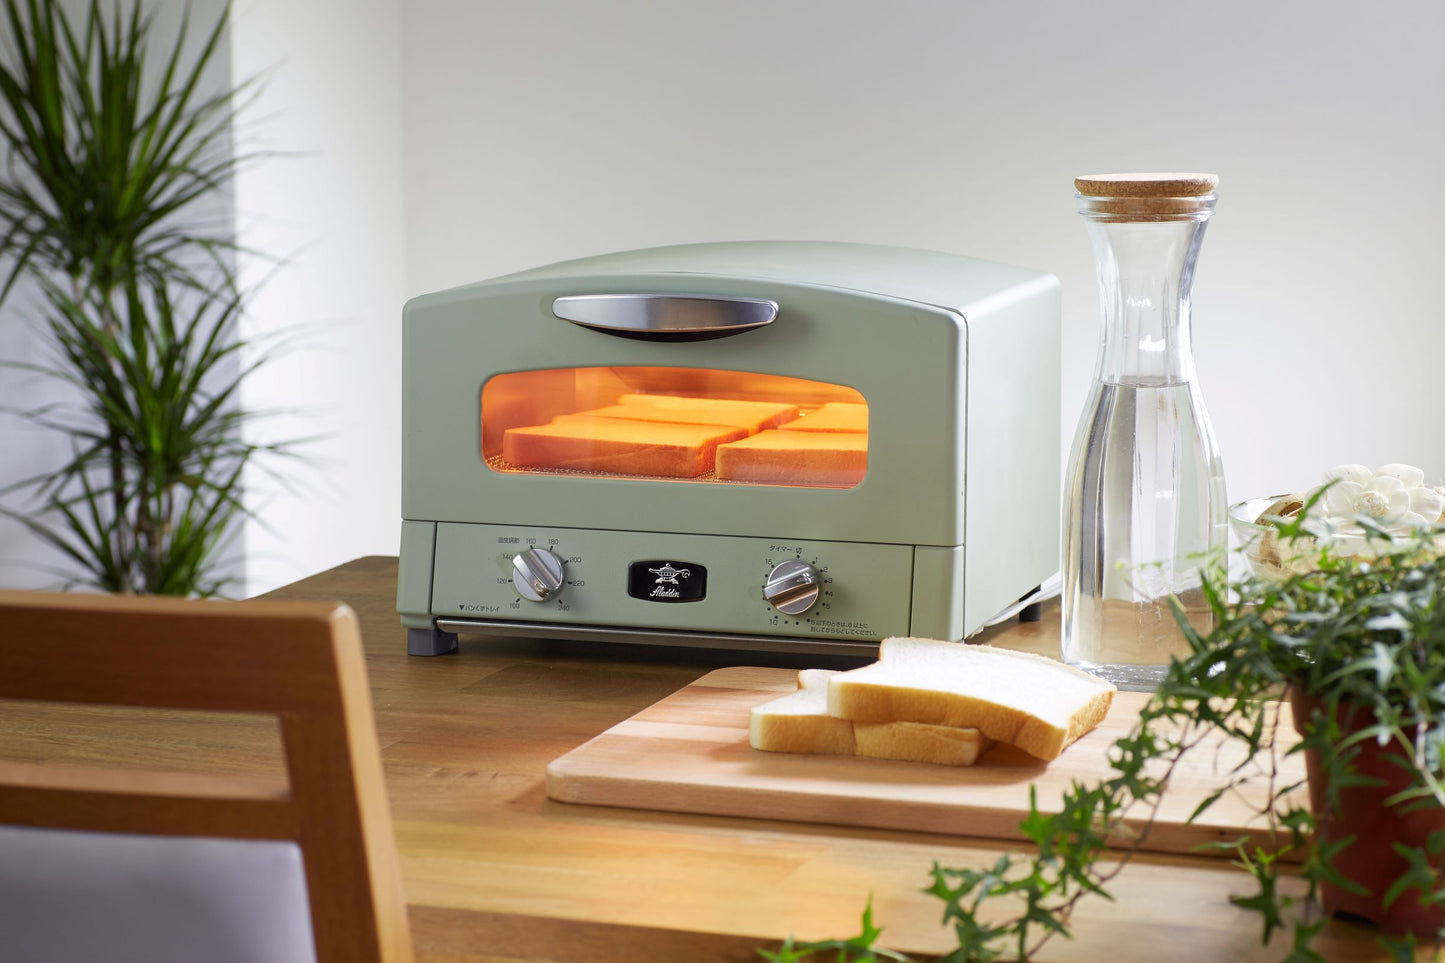 Graphite Grill & Toaster Oven in Green